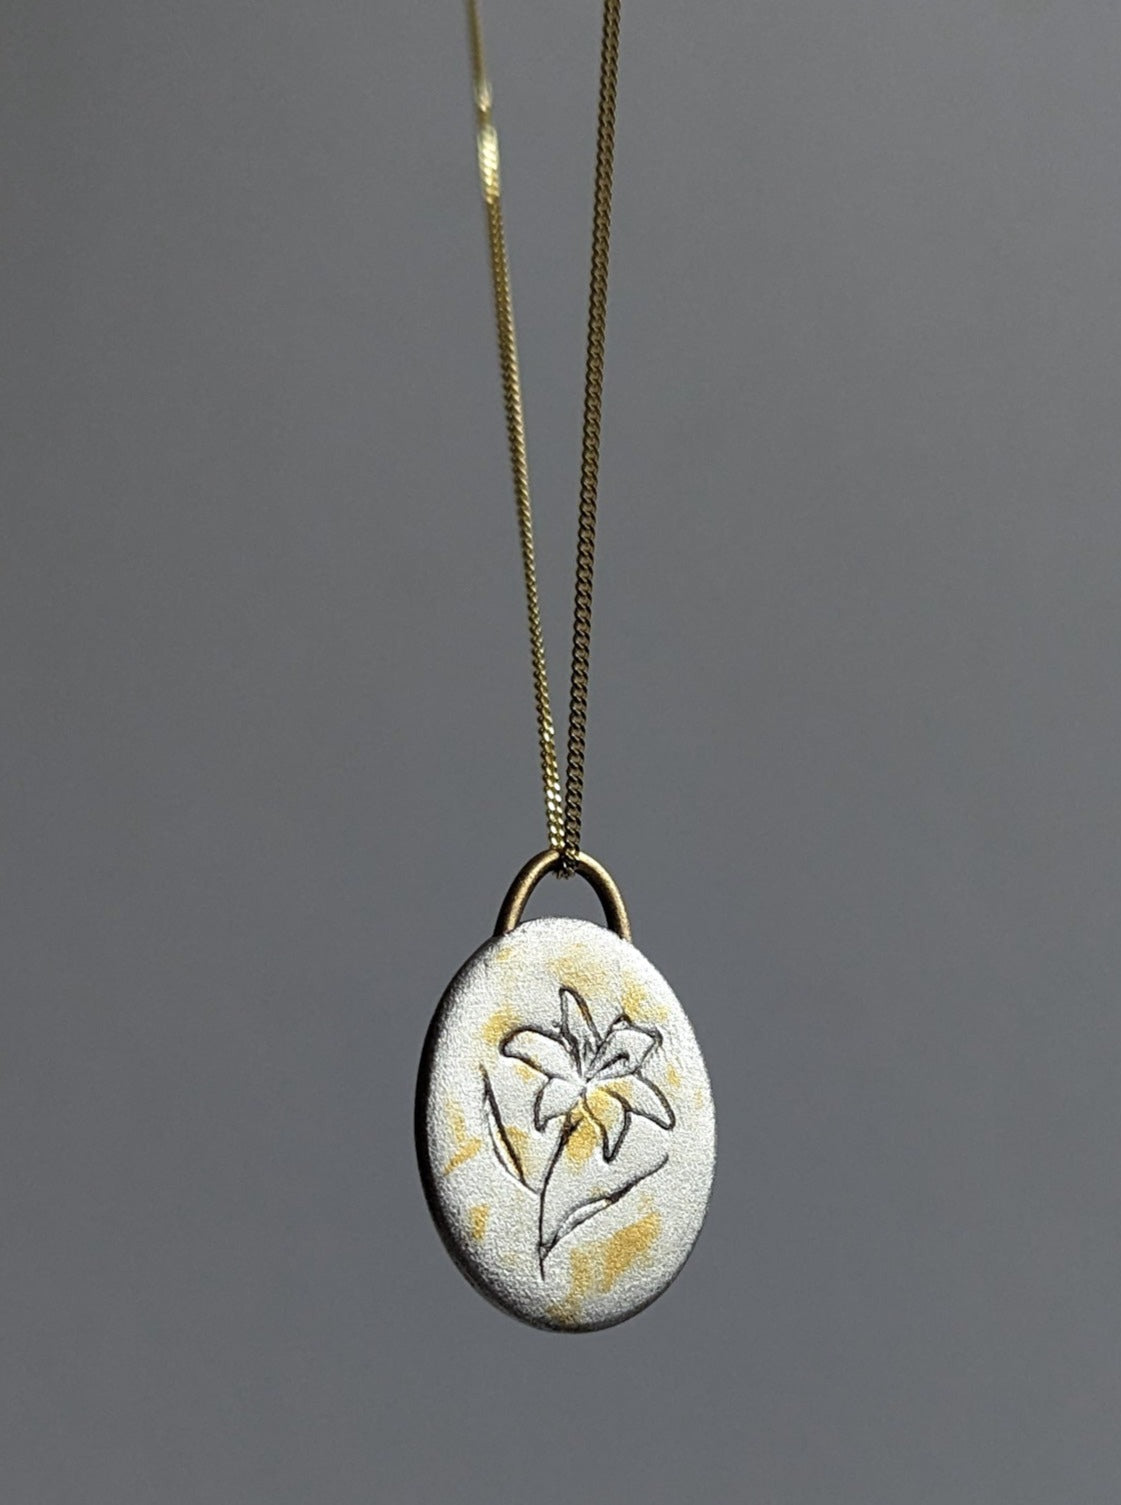 Silver and gold lily flower pendant